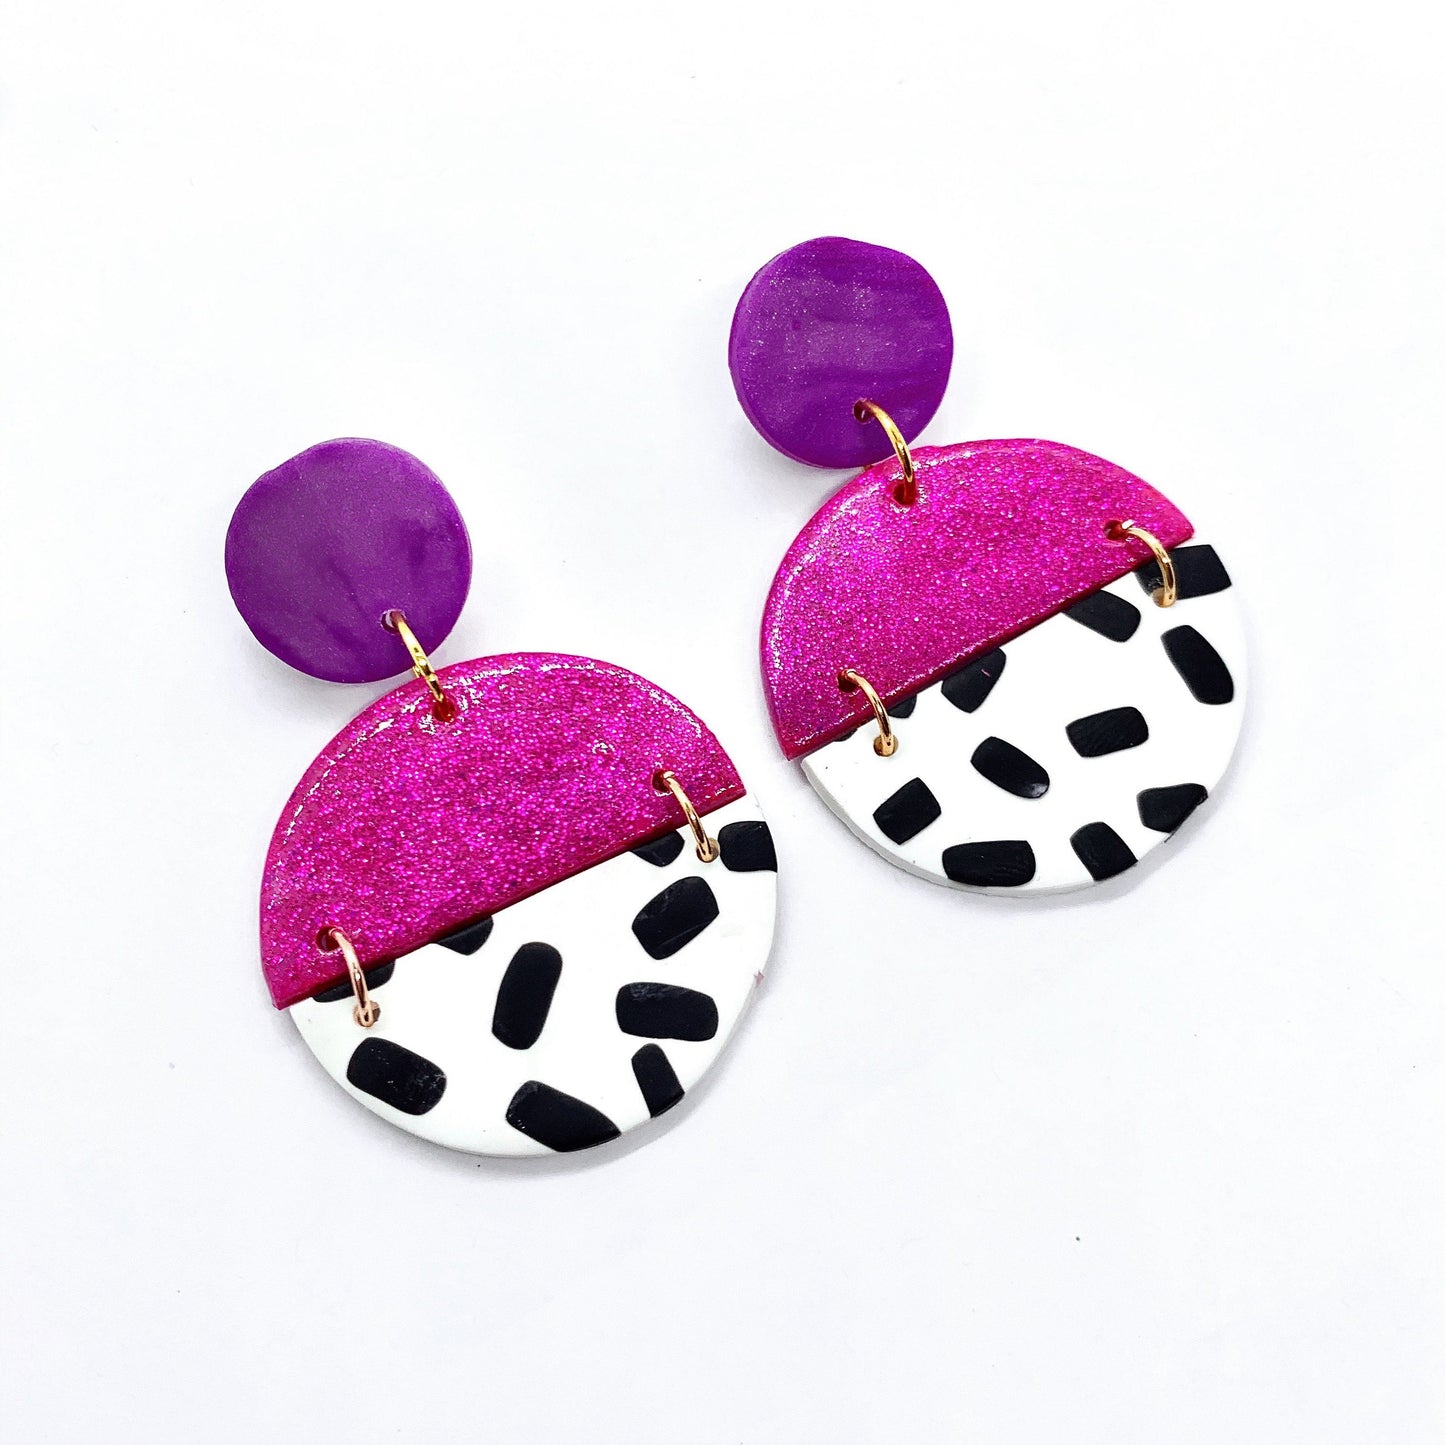 handmade polymer clay earrings in purple pink glitter and black and white polka-dots